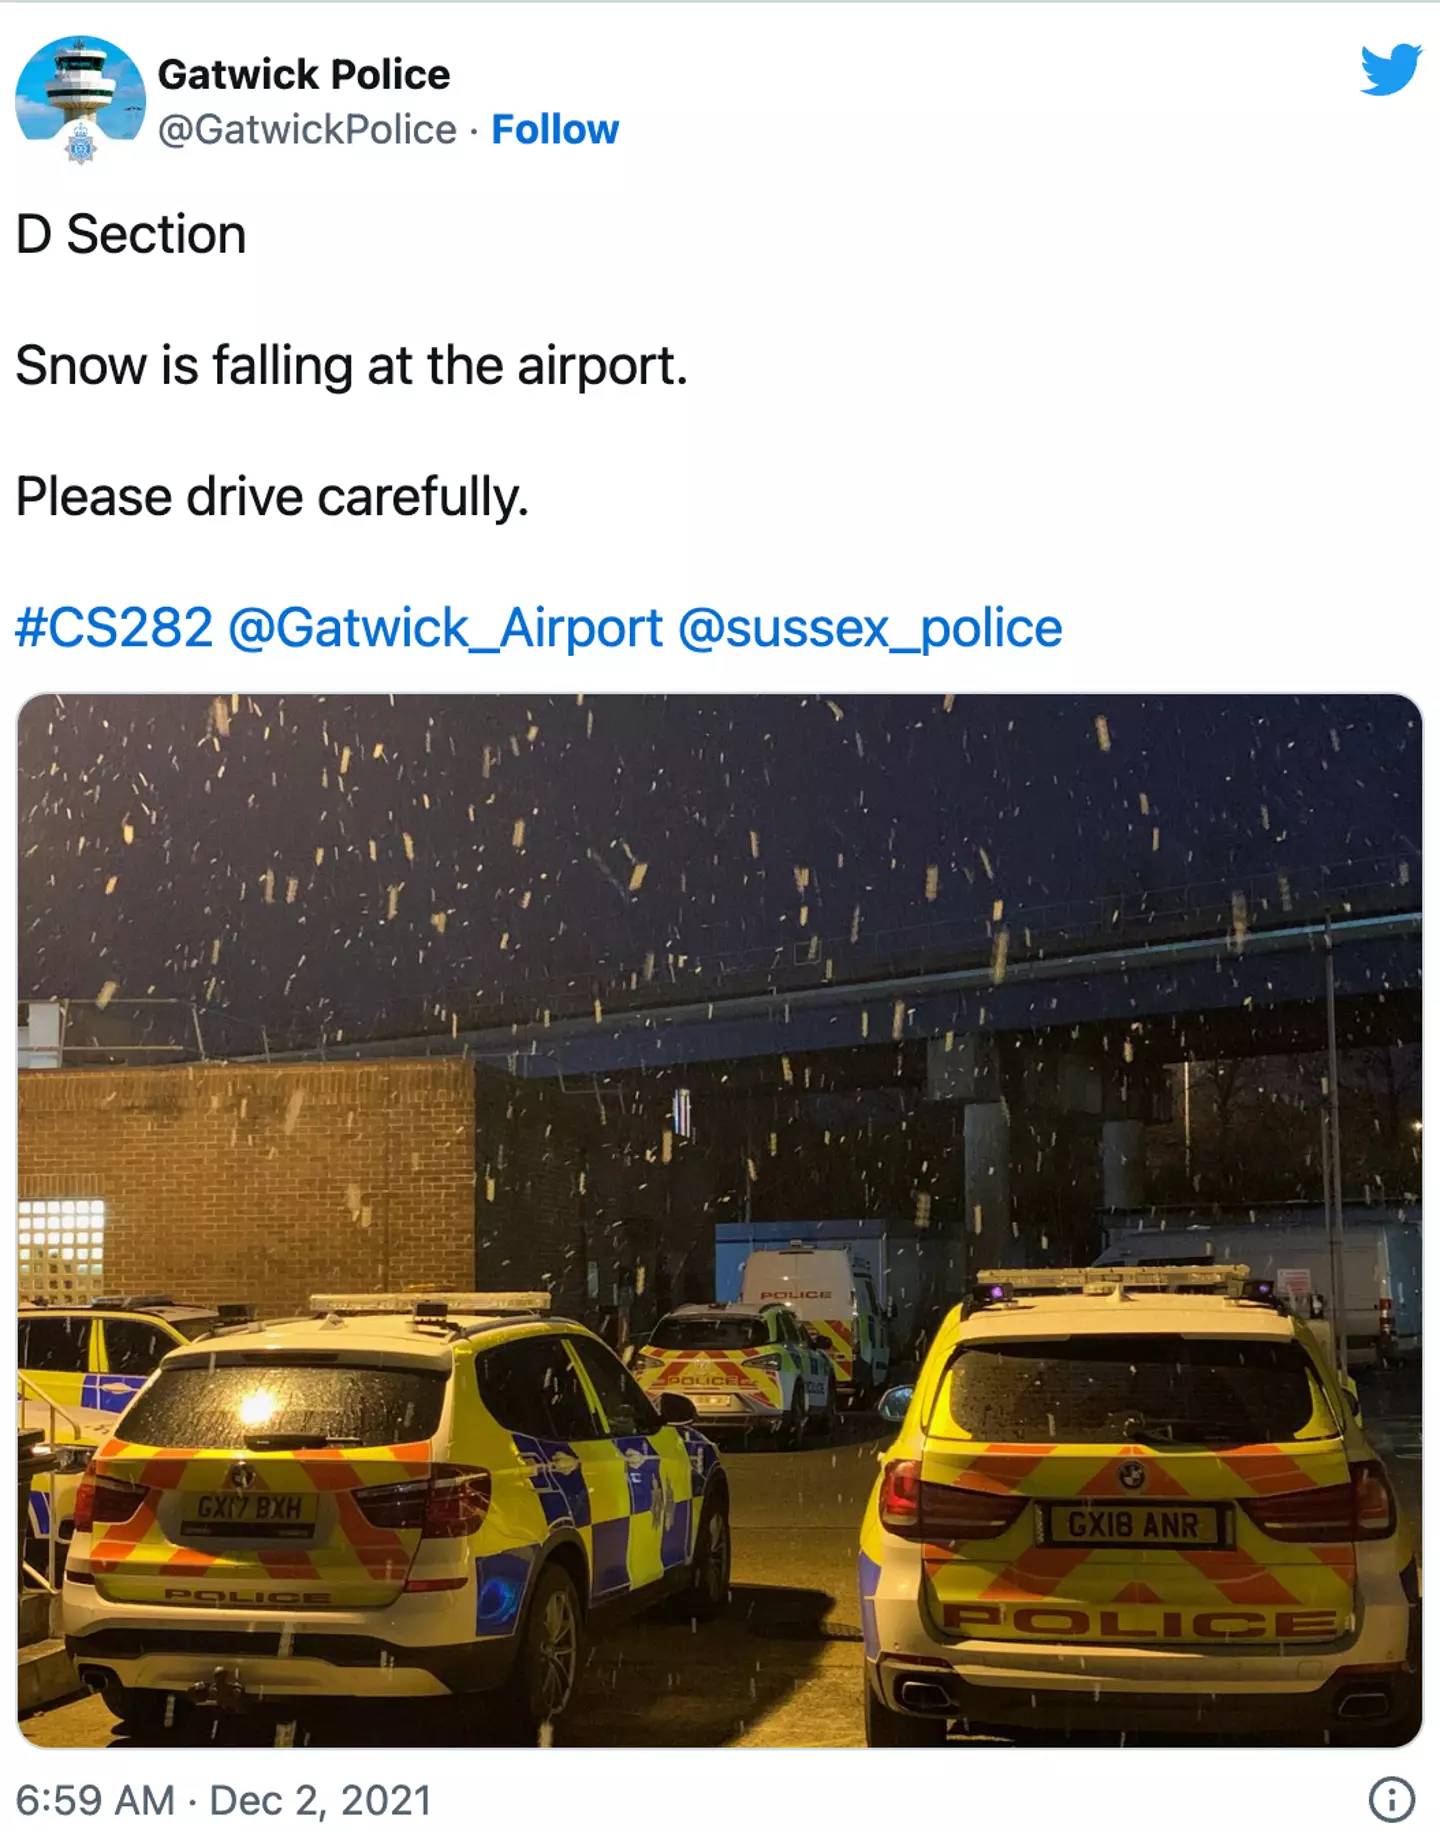 Gatwick Airport has also been affected by the snow.